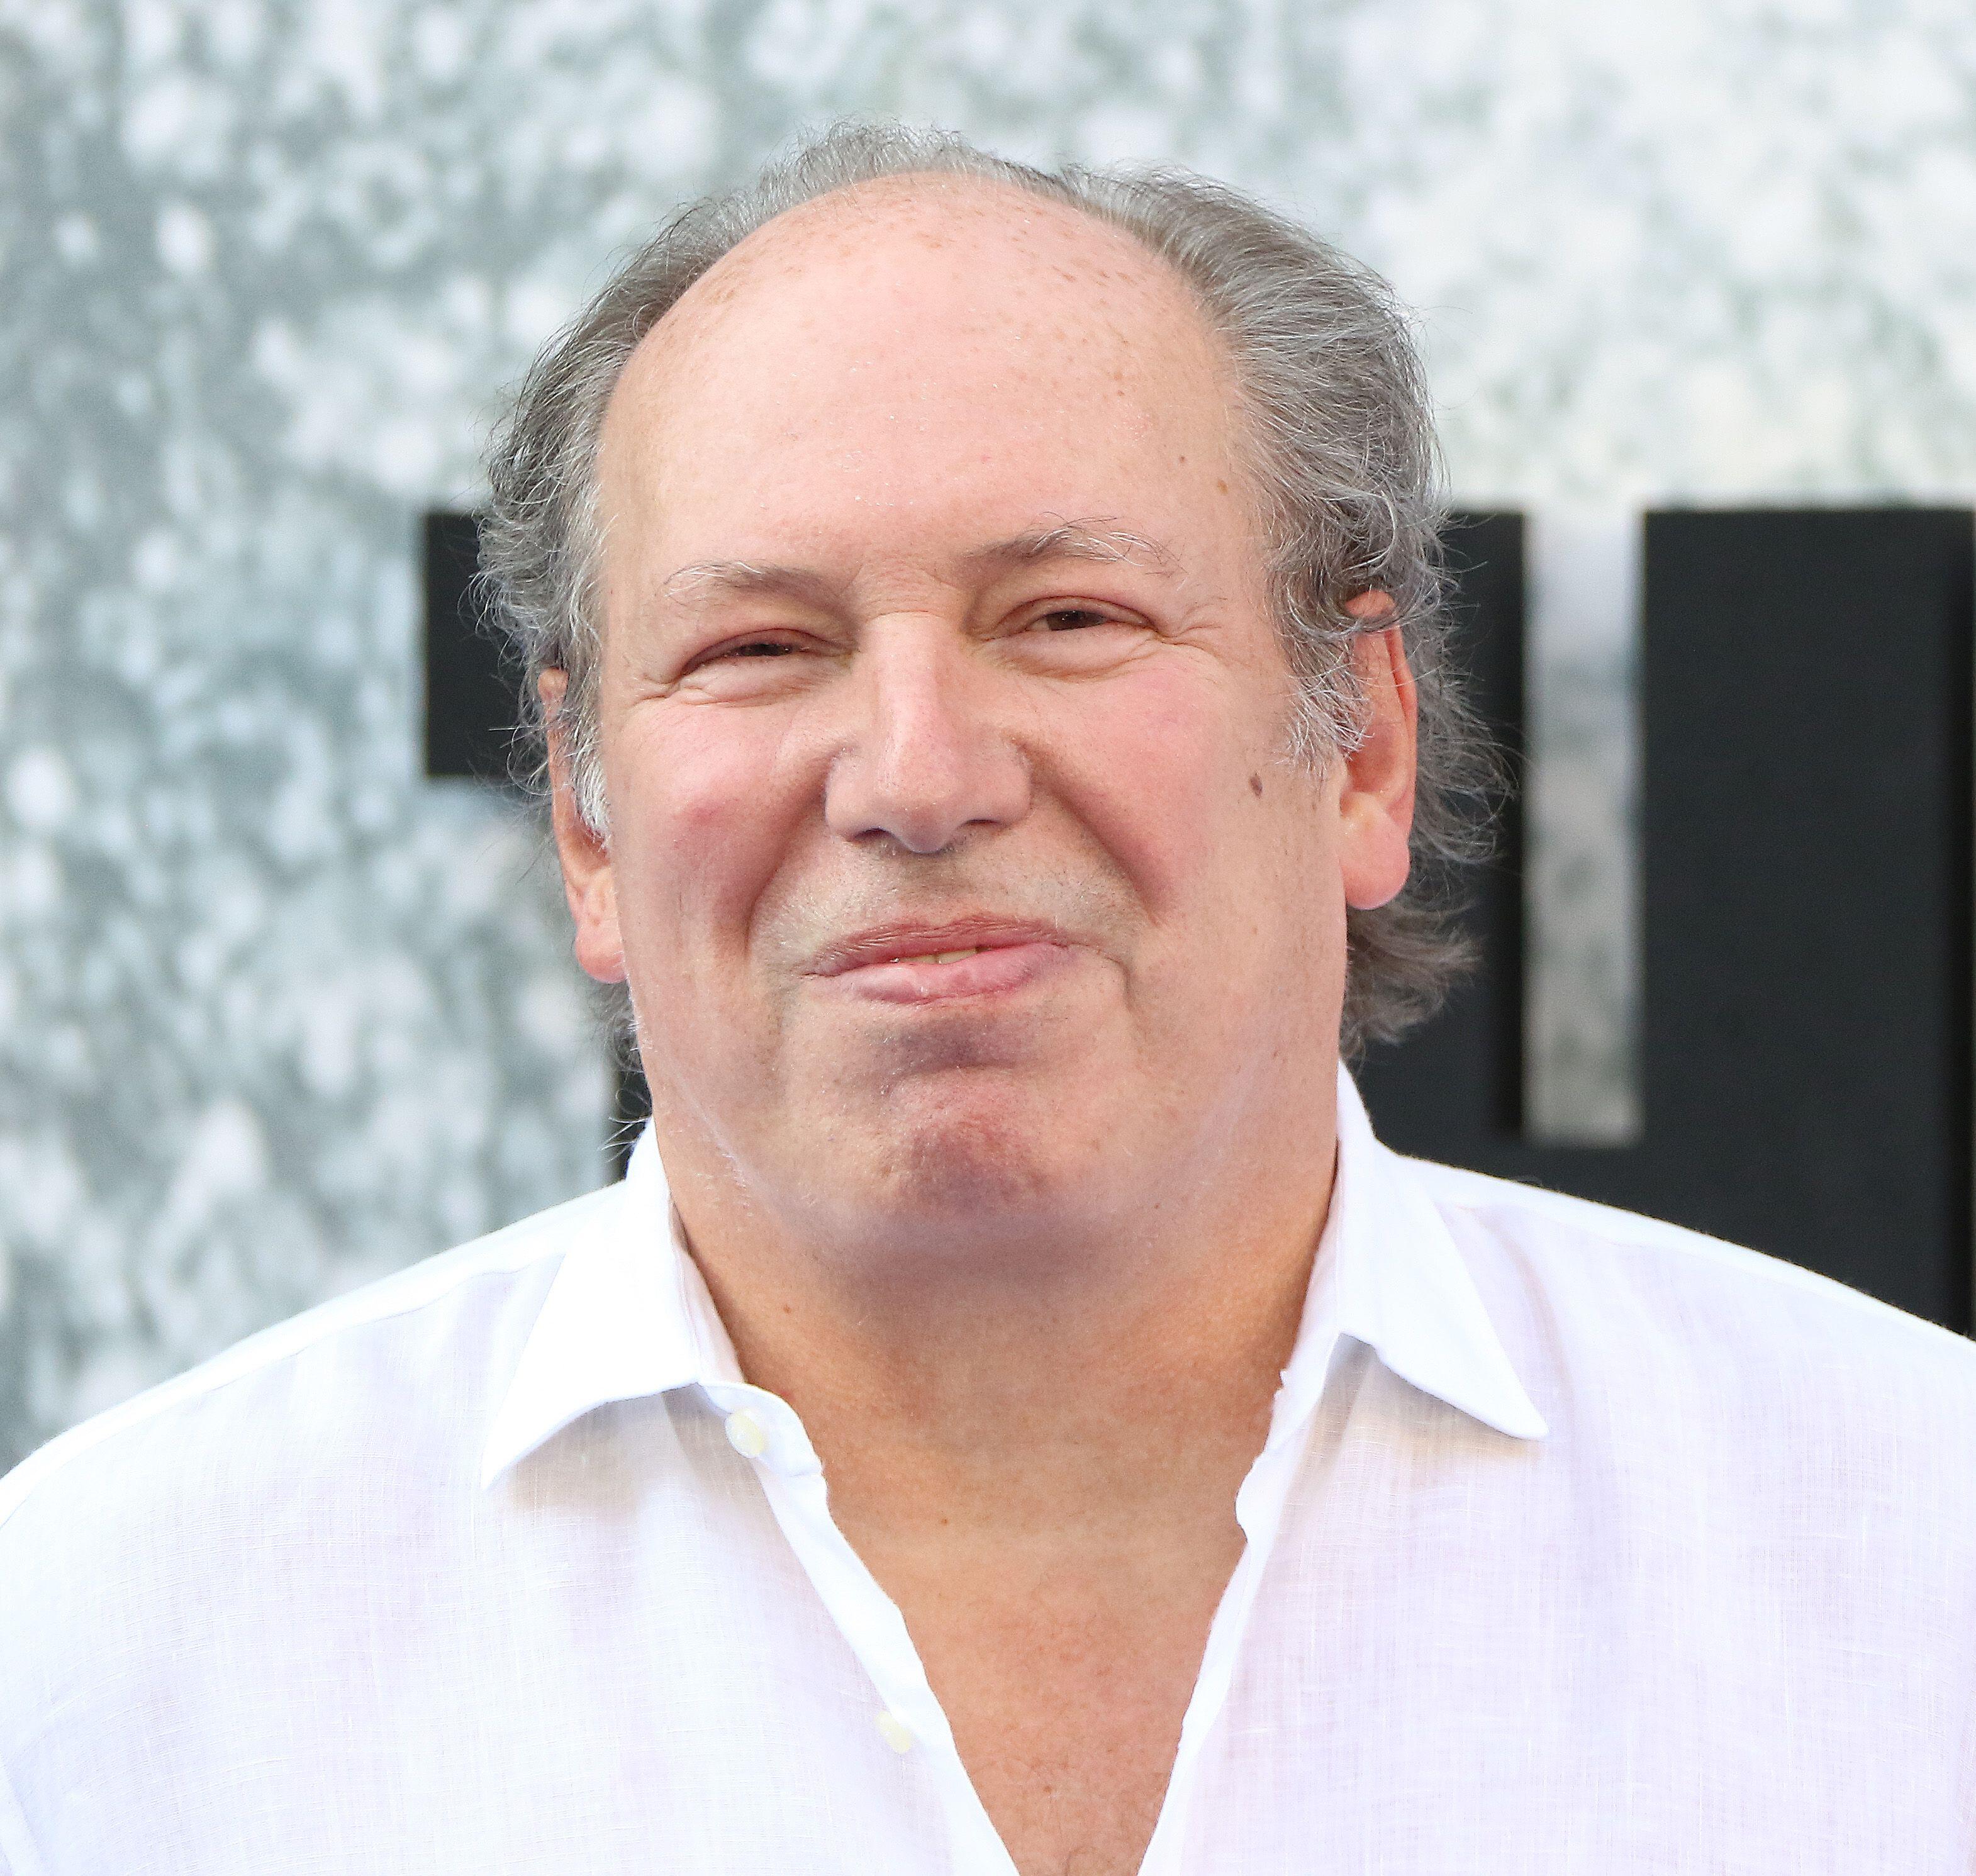 Hans Zimmer Proposes Onstage During London Concert: Watch